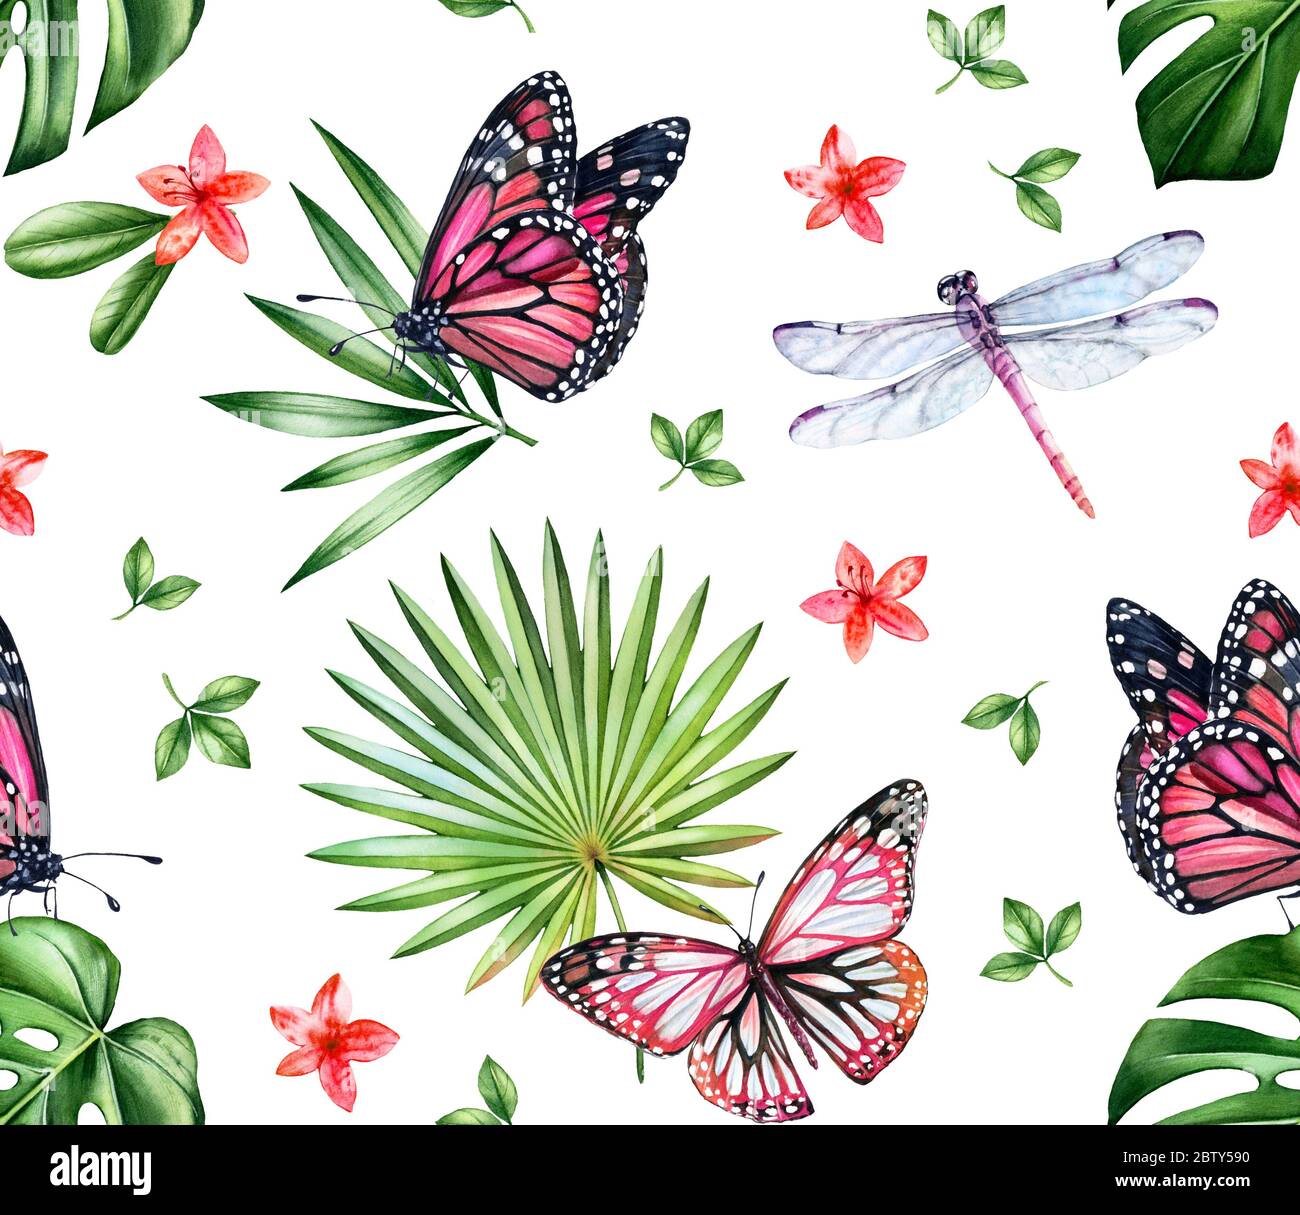 Watercolor floral seamless pattern. Pink monarch butterflies, dragonflies and palm leaves on white background. Tropical botanical hand drawn Stock Photo